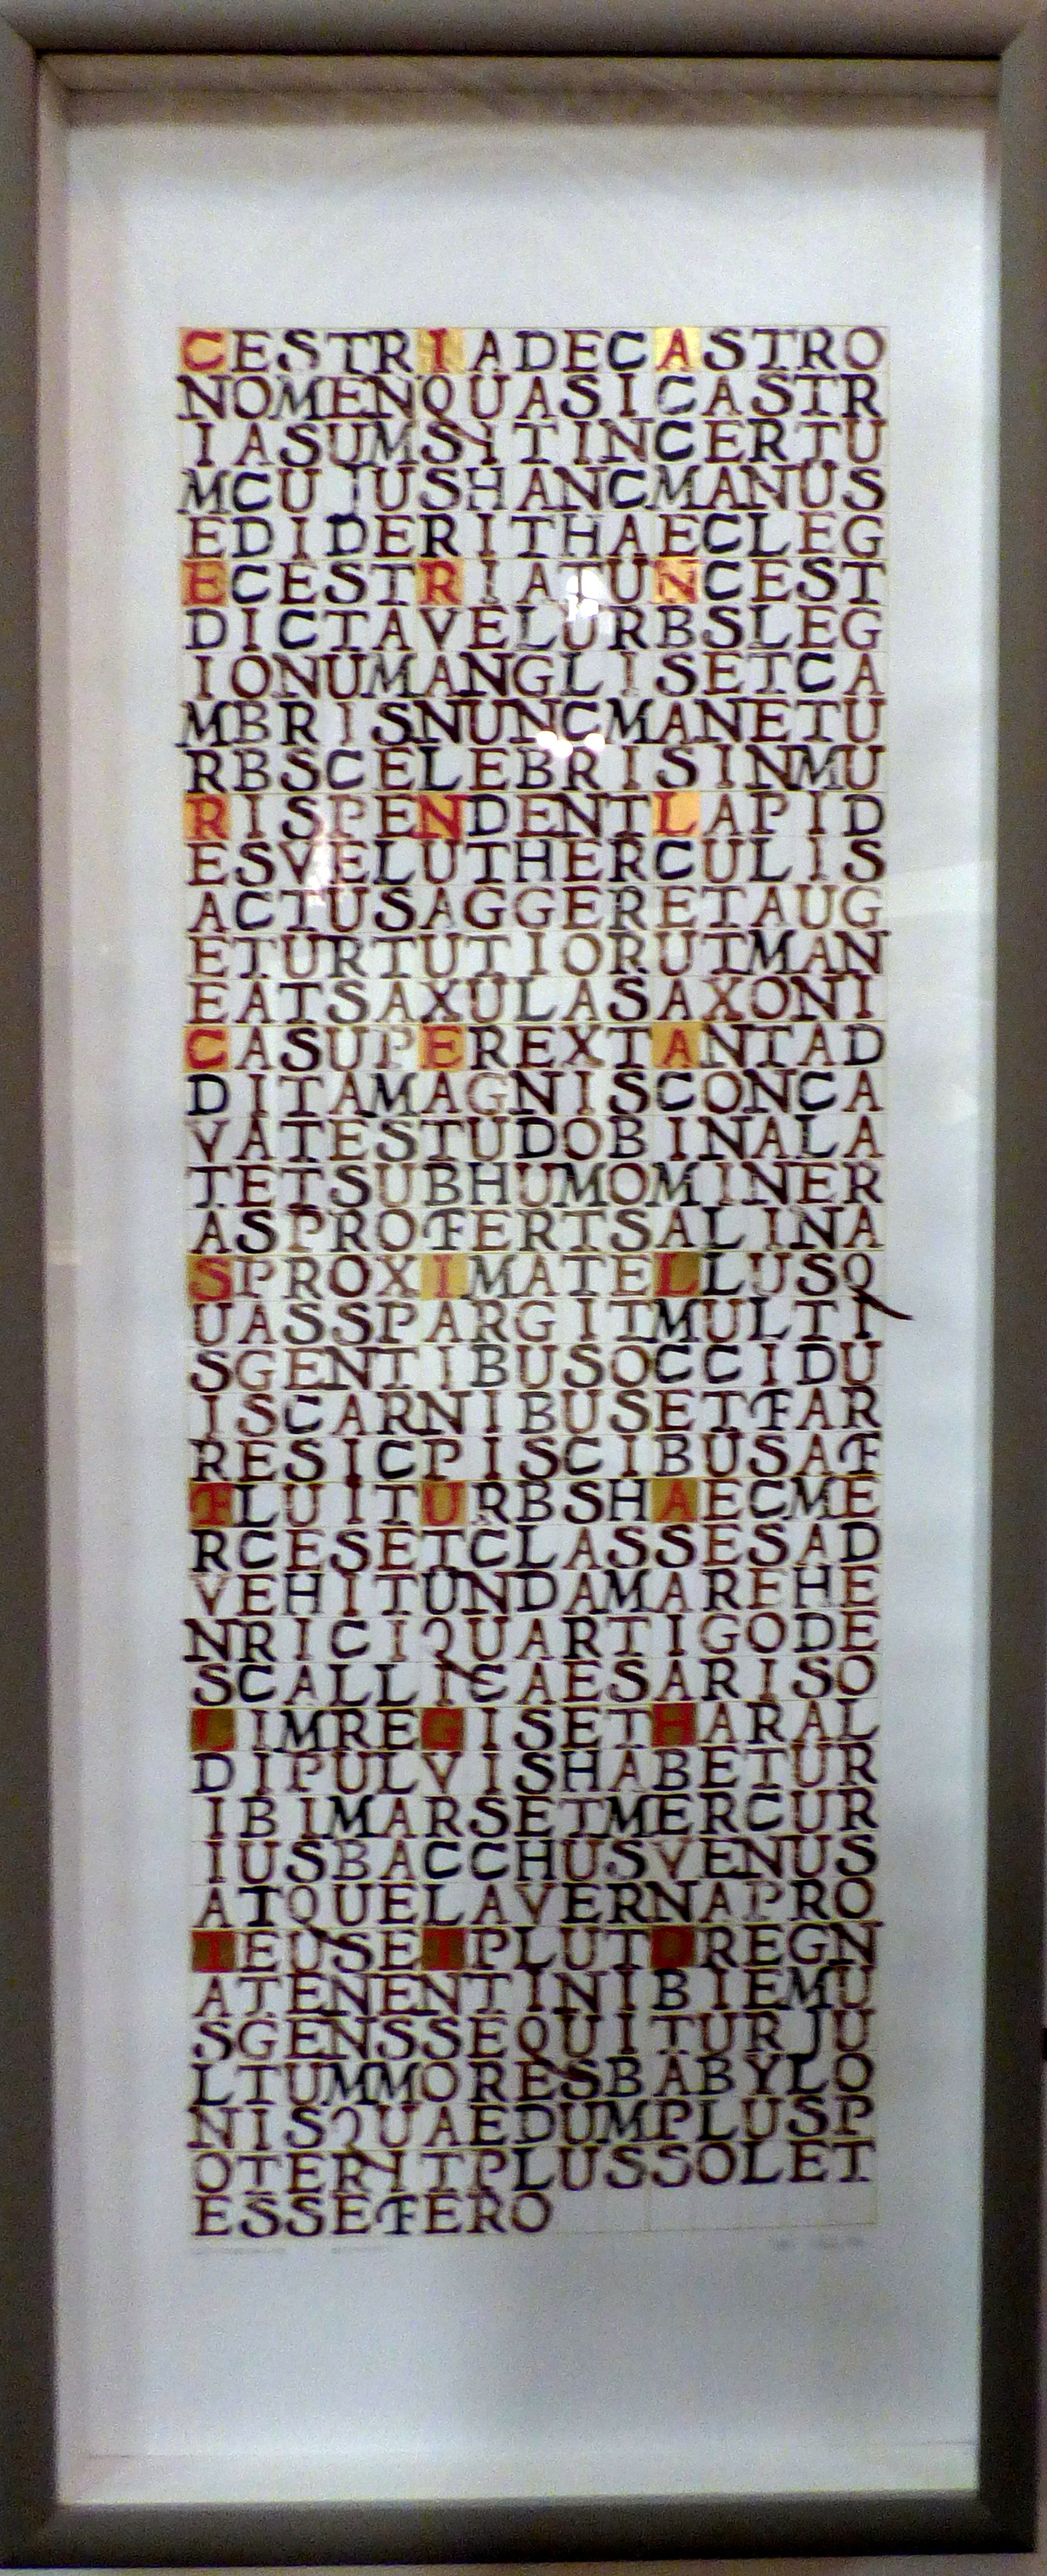 A POEM IN PRAISE OF CHESTER, printed by stamping, In All Its Glory exhibition, Chester Cathedral 2016